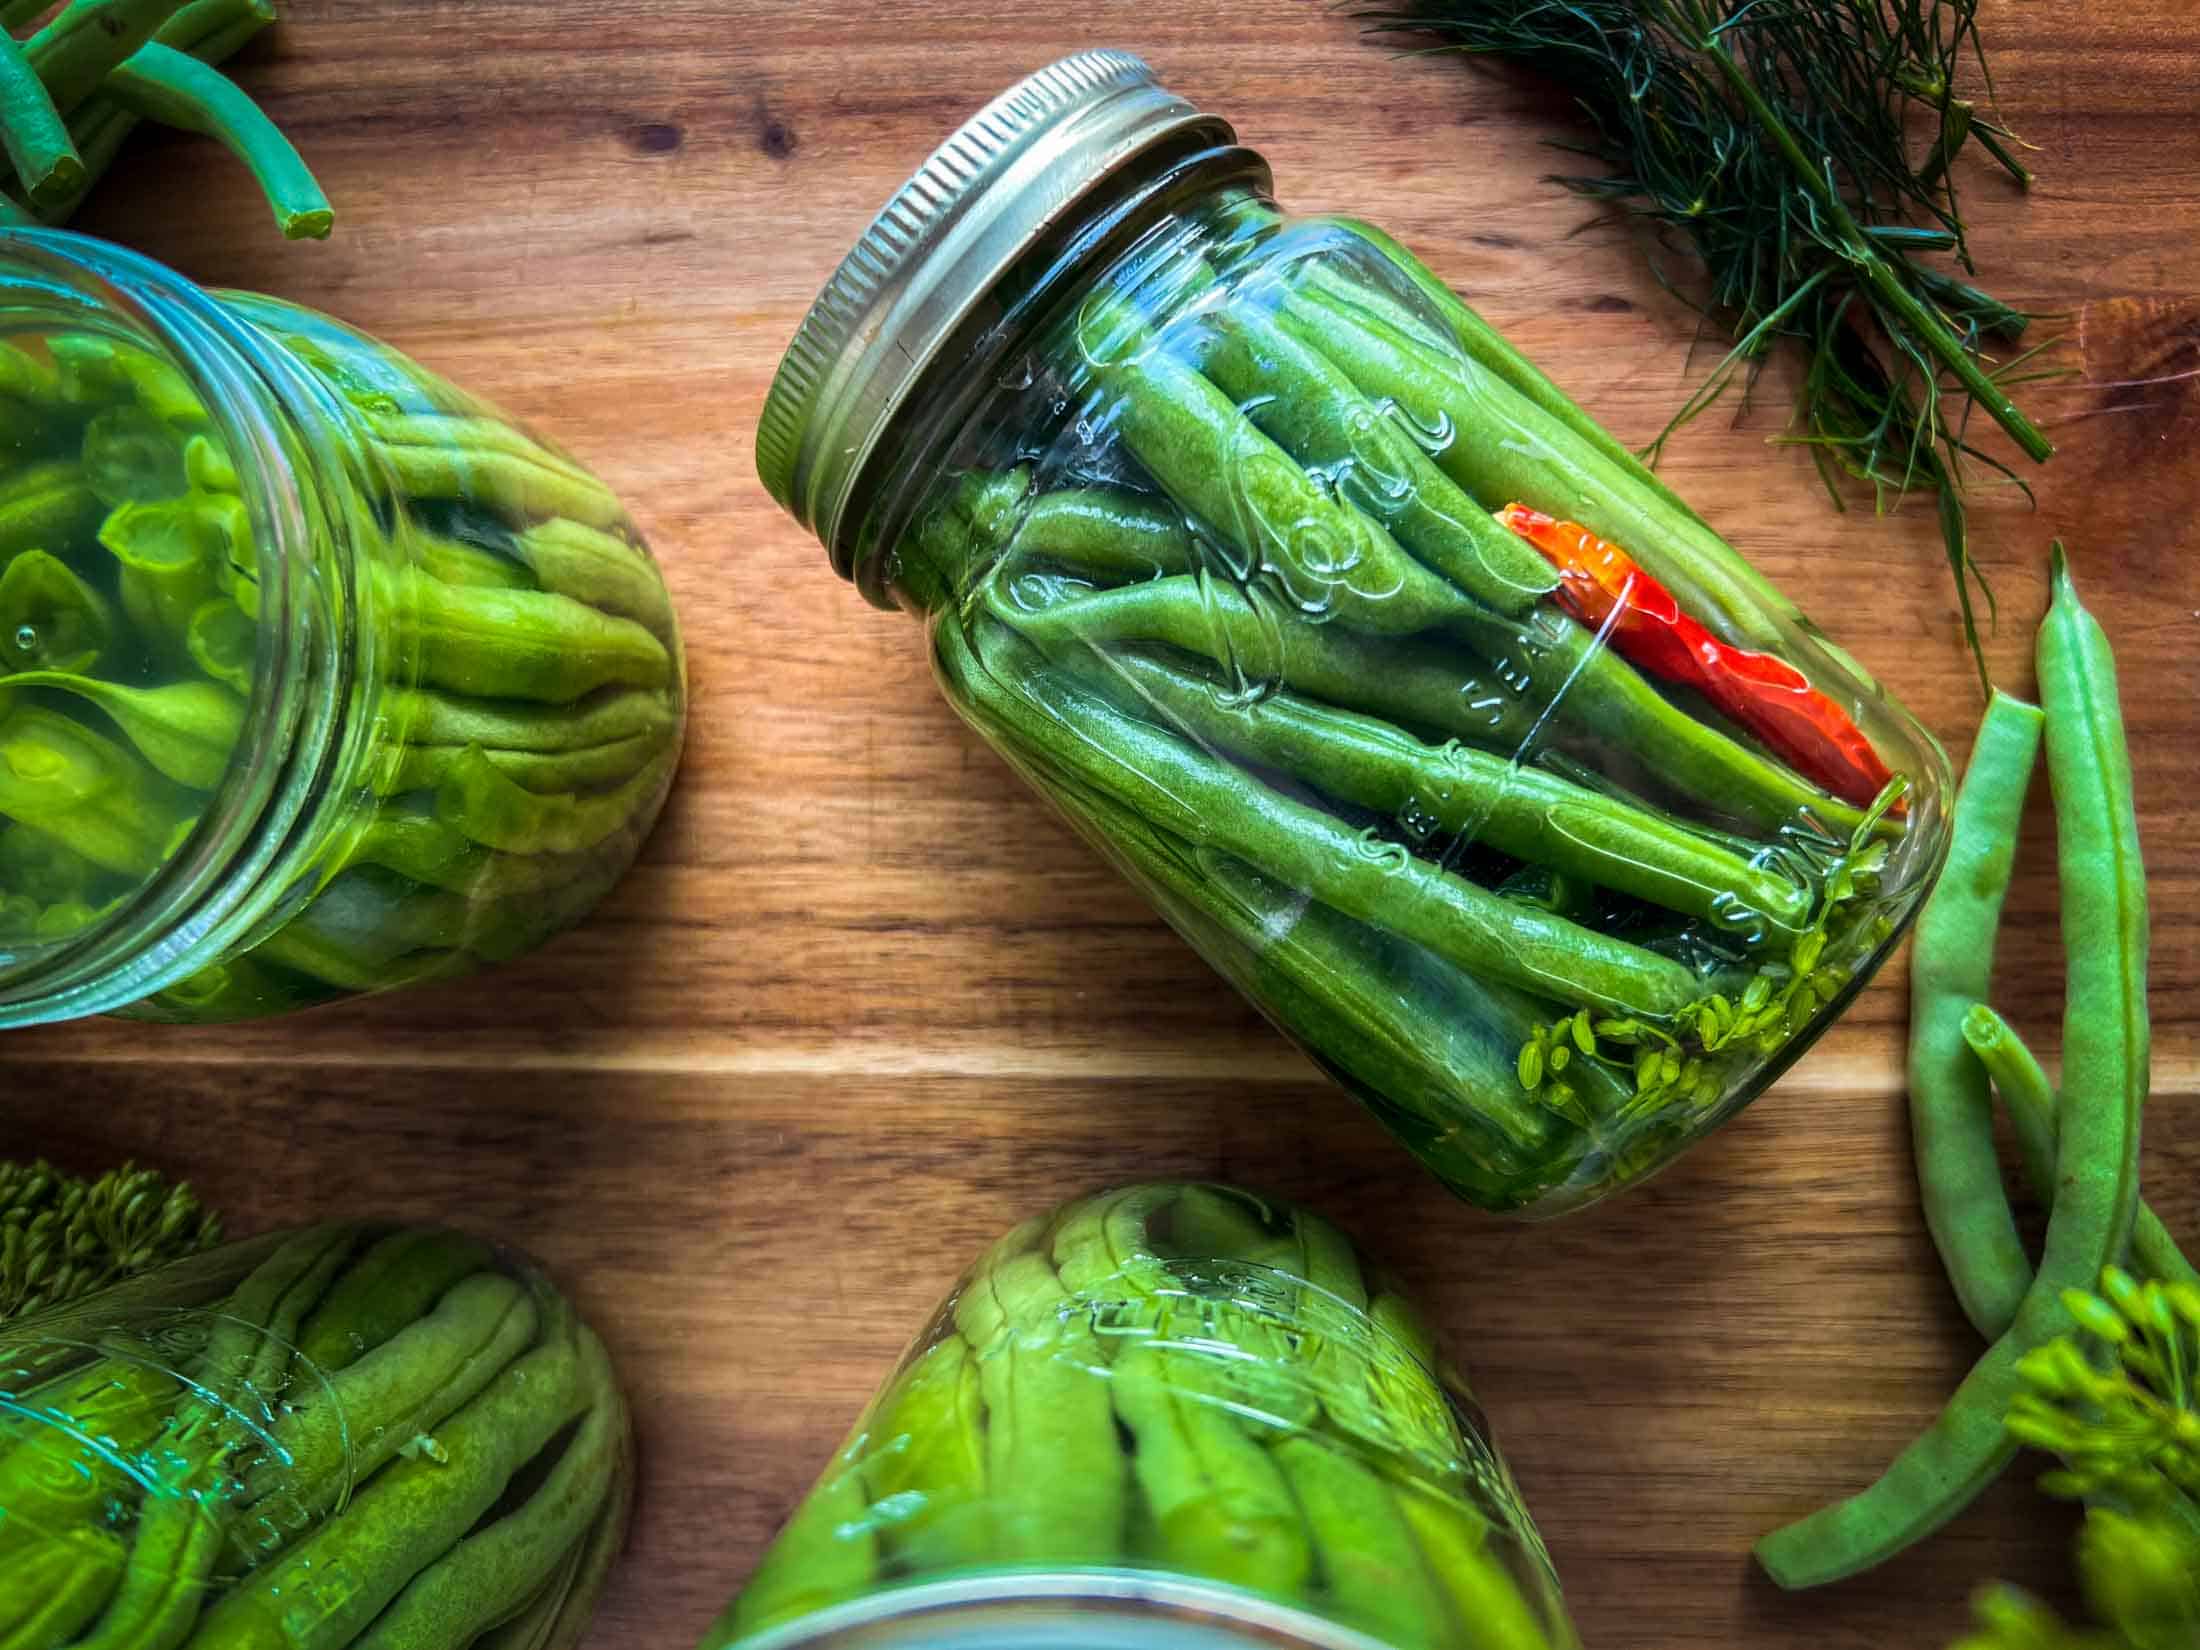 Fermented green beans in a glass jar with a red pepper.